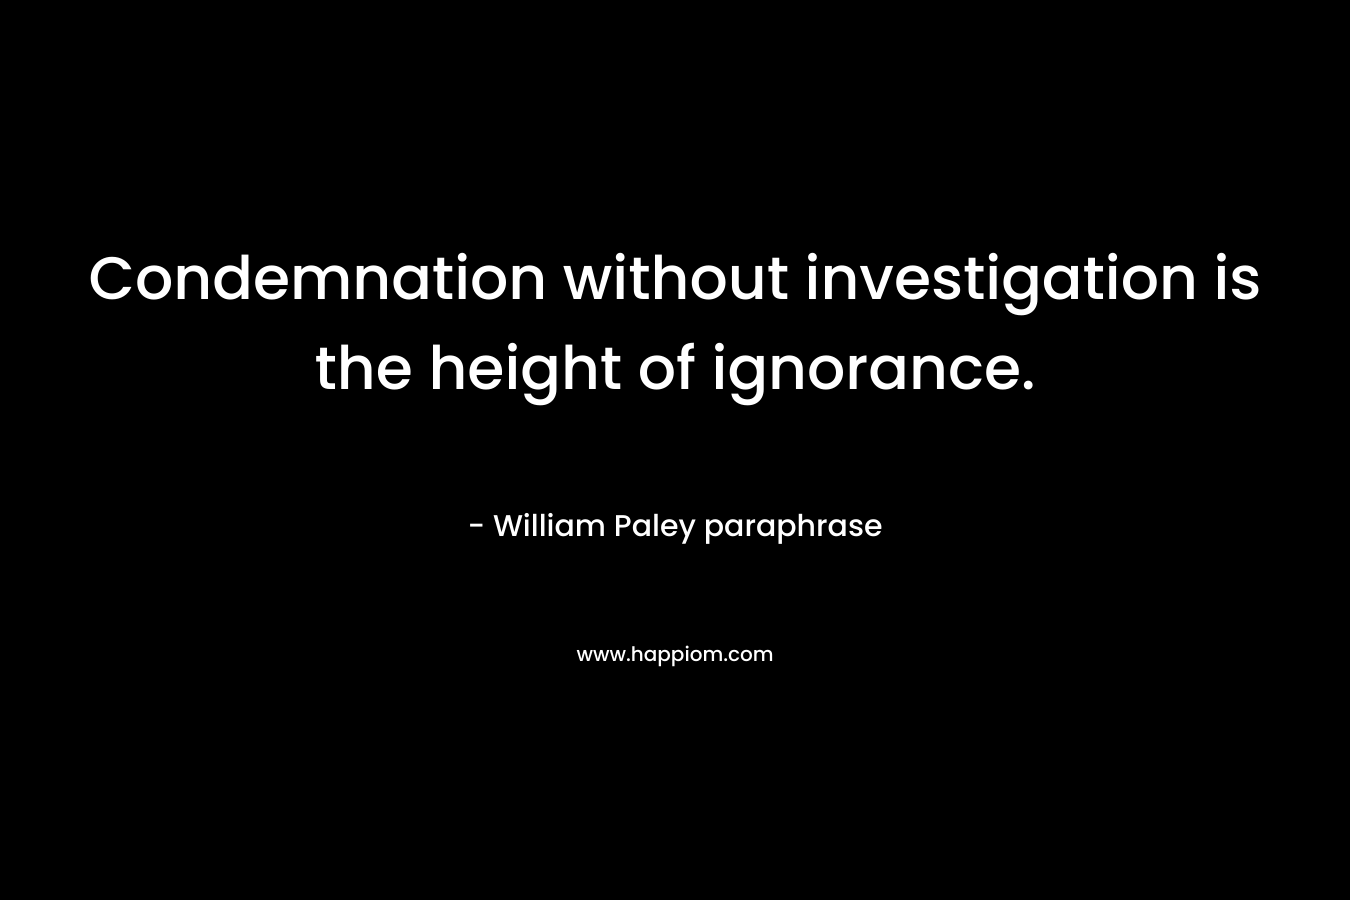 Condemnation without investigation is the height of ignorance. – William Paley paraphrase